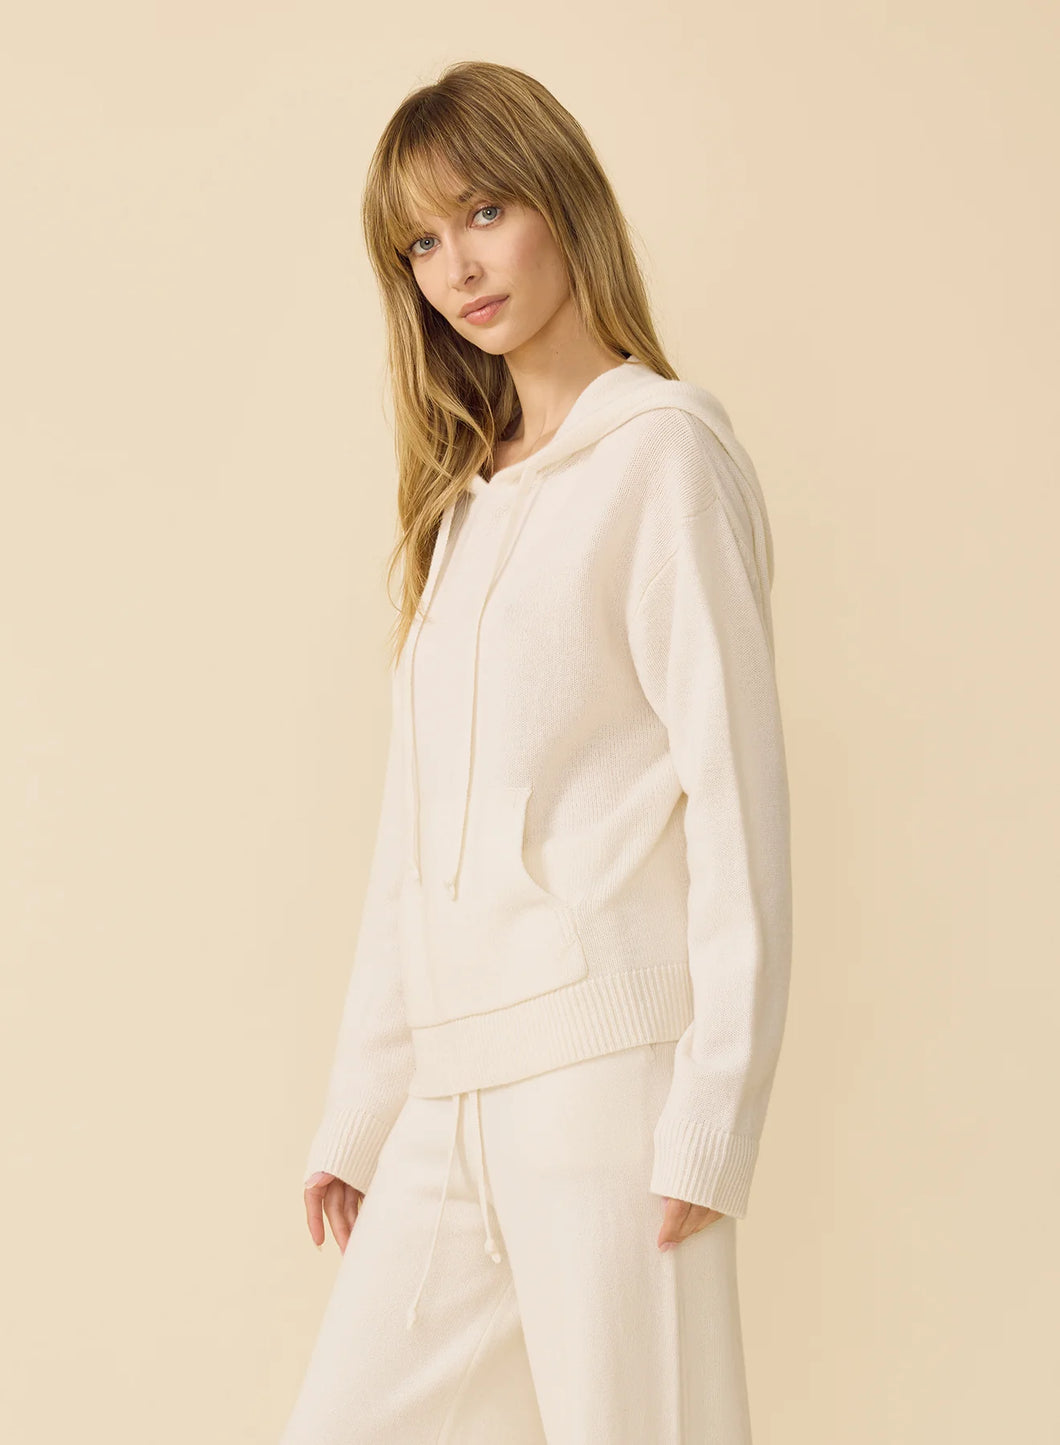 Ivory Cashmere Hoodie, available at west2westport.com